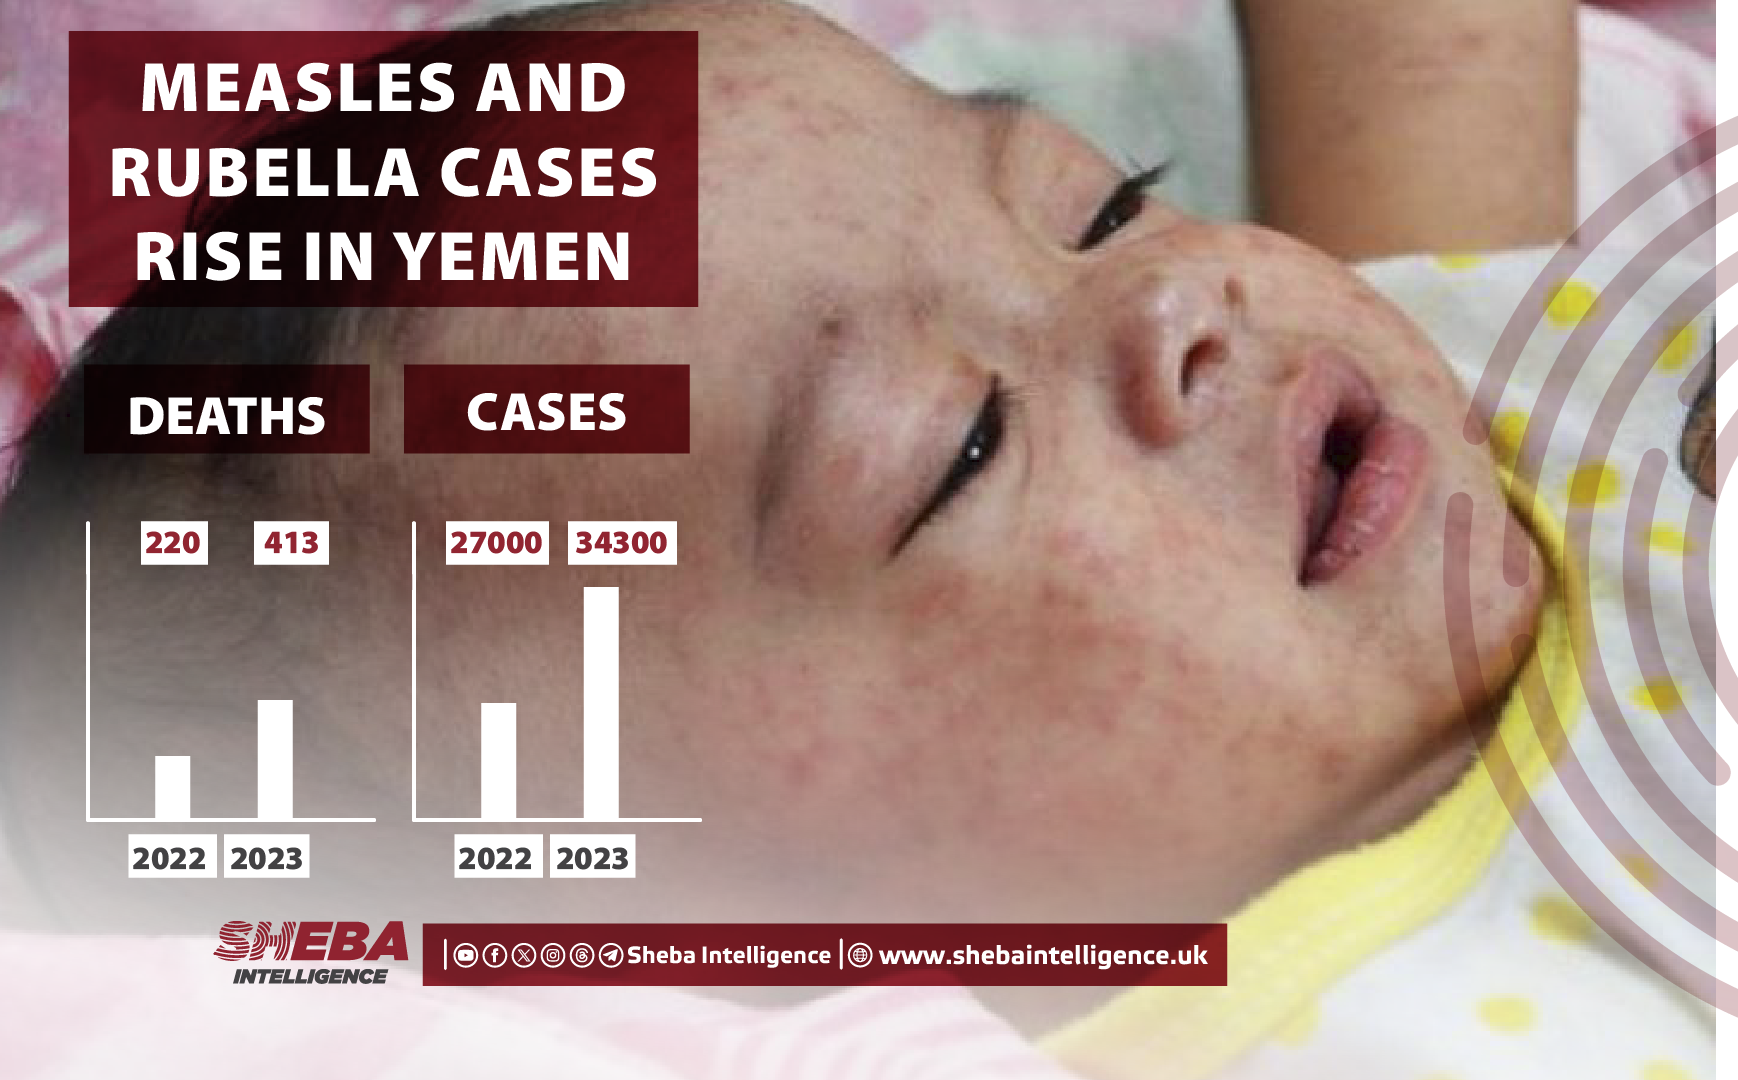 Measles and Rubella Cases Rise in Yemen